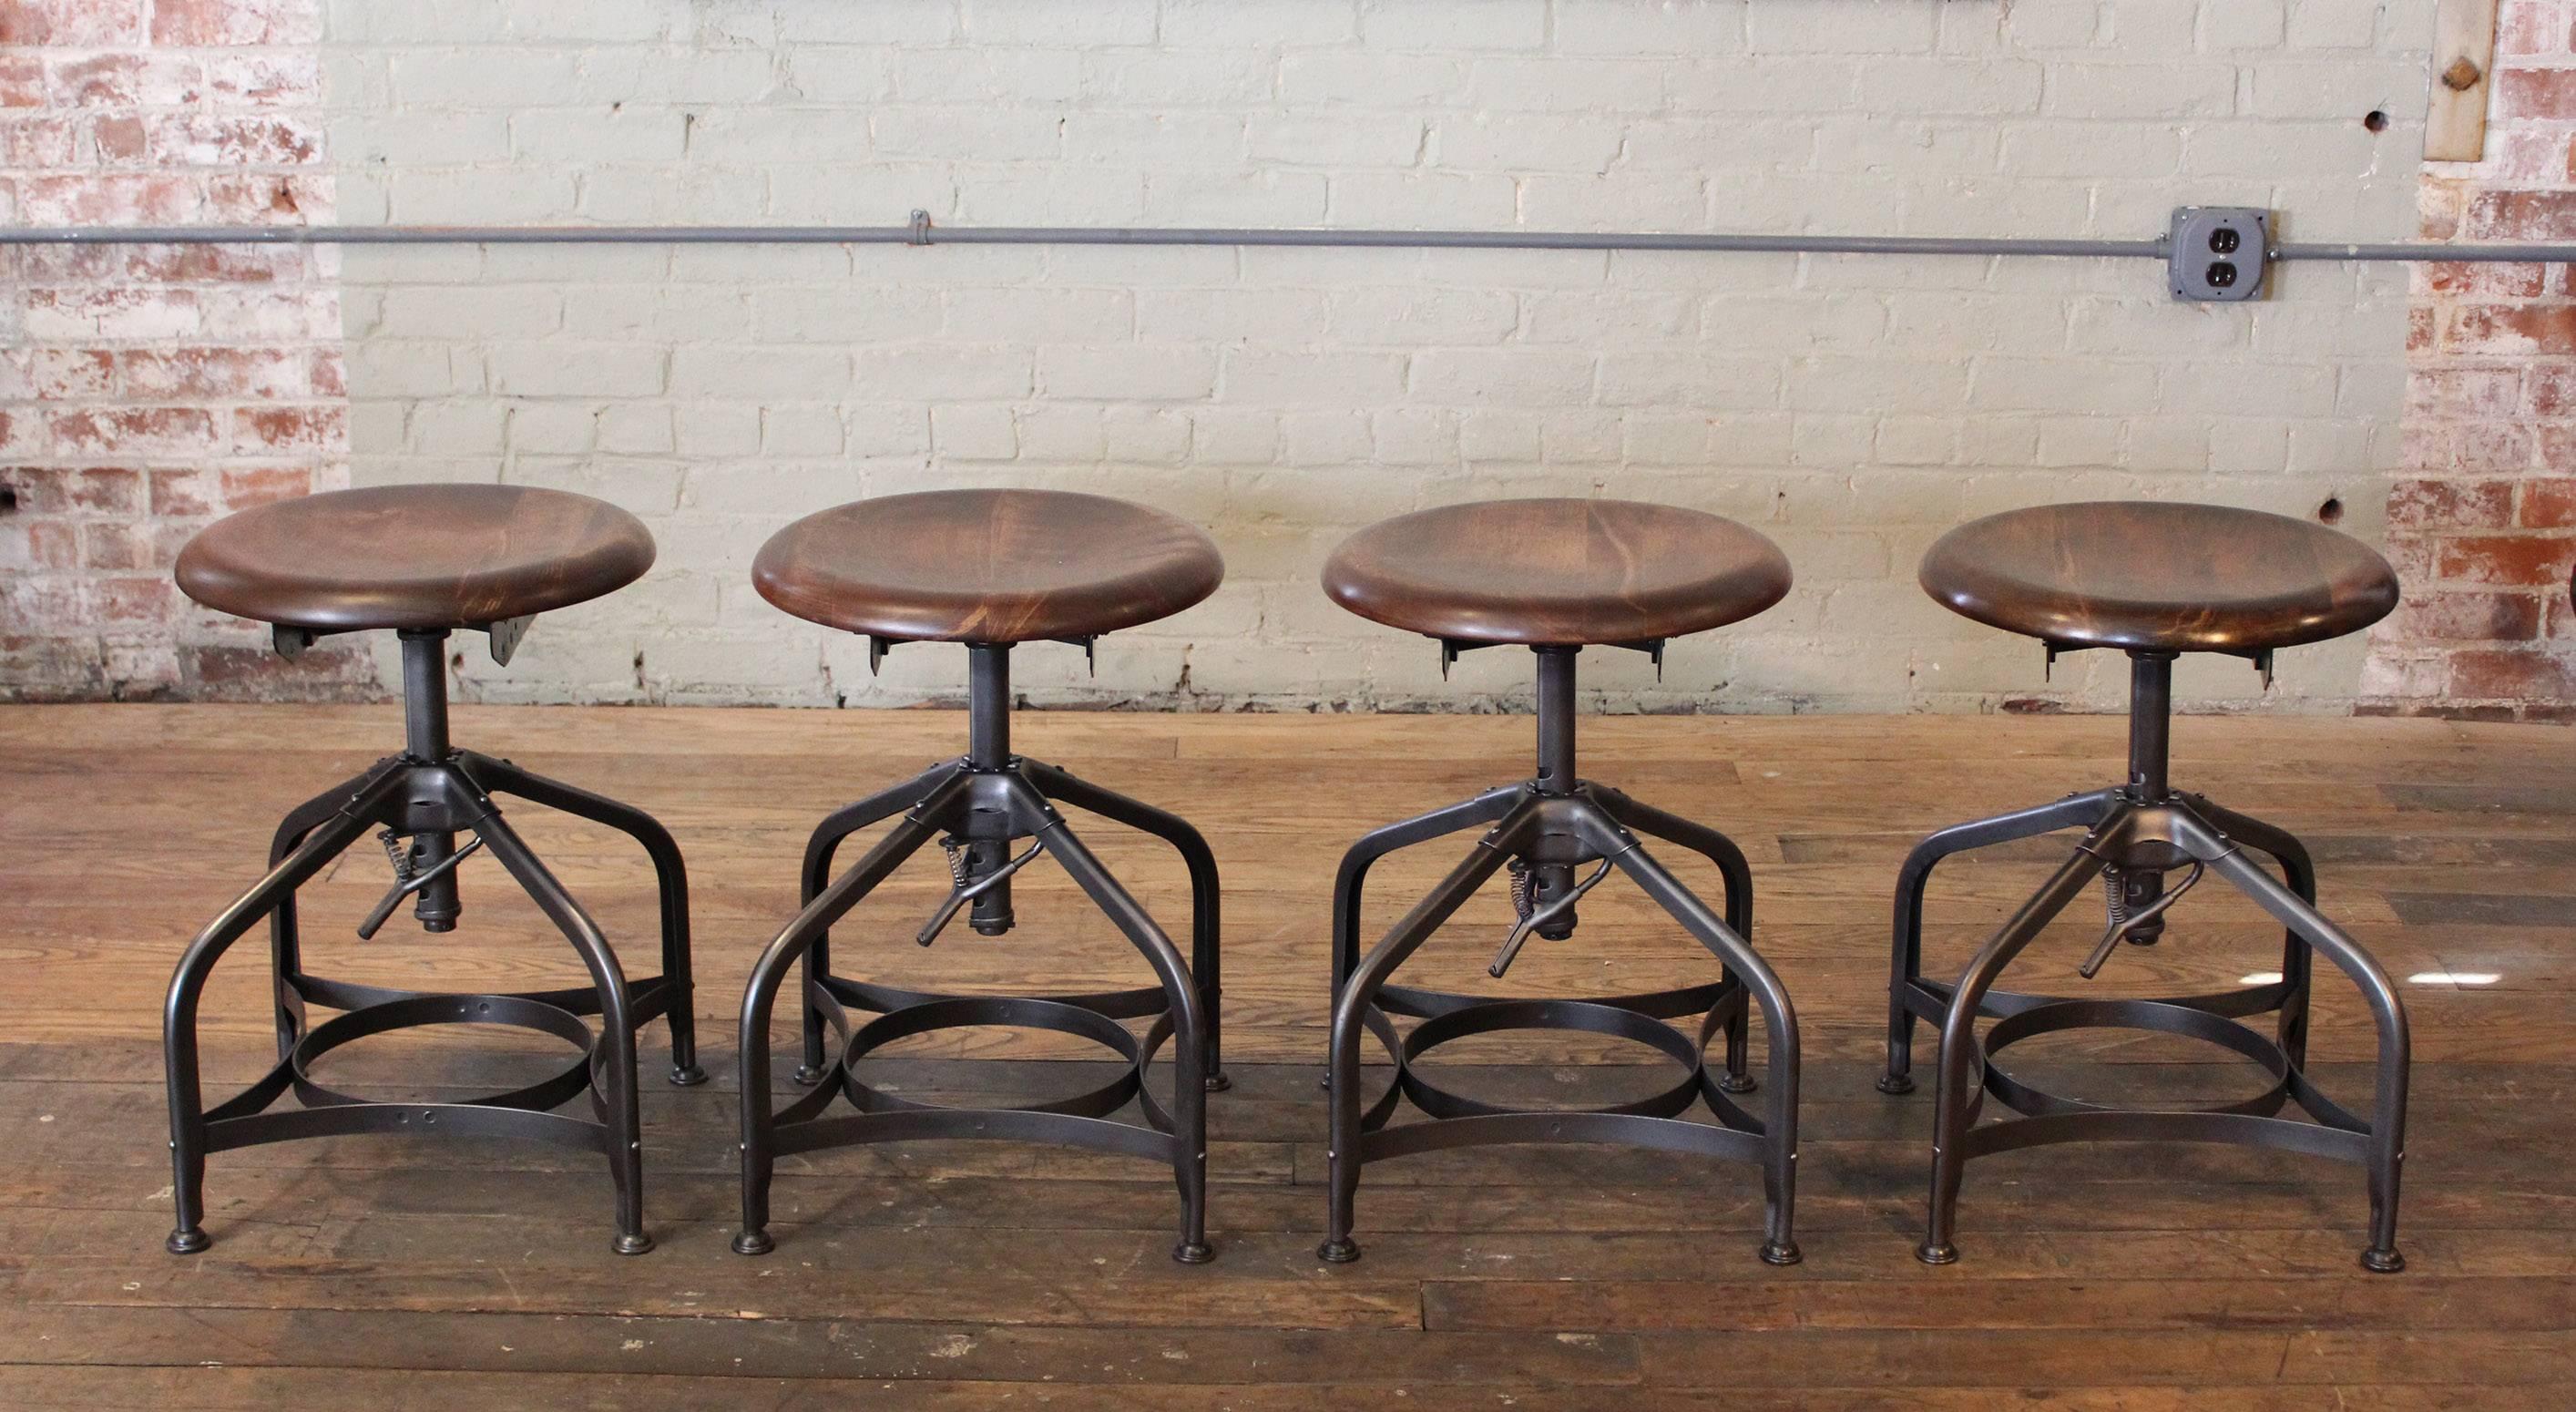 Set of four steampunk vintage industrial adjustable toledo wood and metal shop stools. Seat measures 17 1/2" in diameter, and measures 1 3/16" thick. Seat height is adjustable from 17 1/2" - 22 1/2". Base measures 15 1/4" x